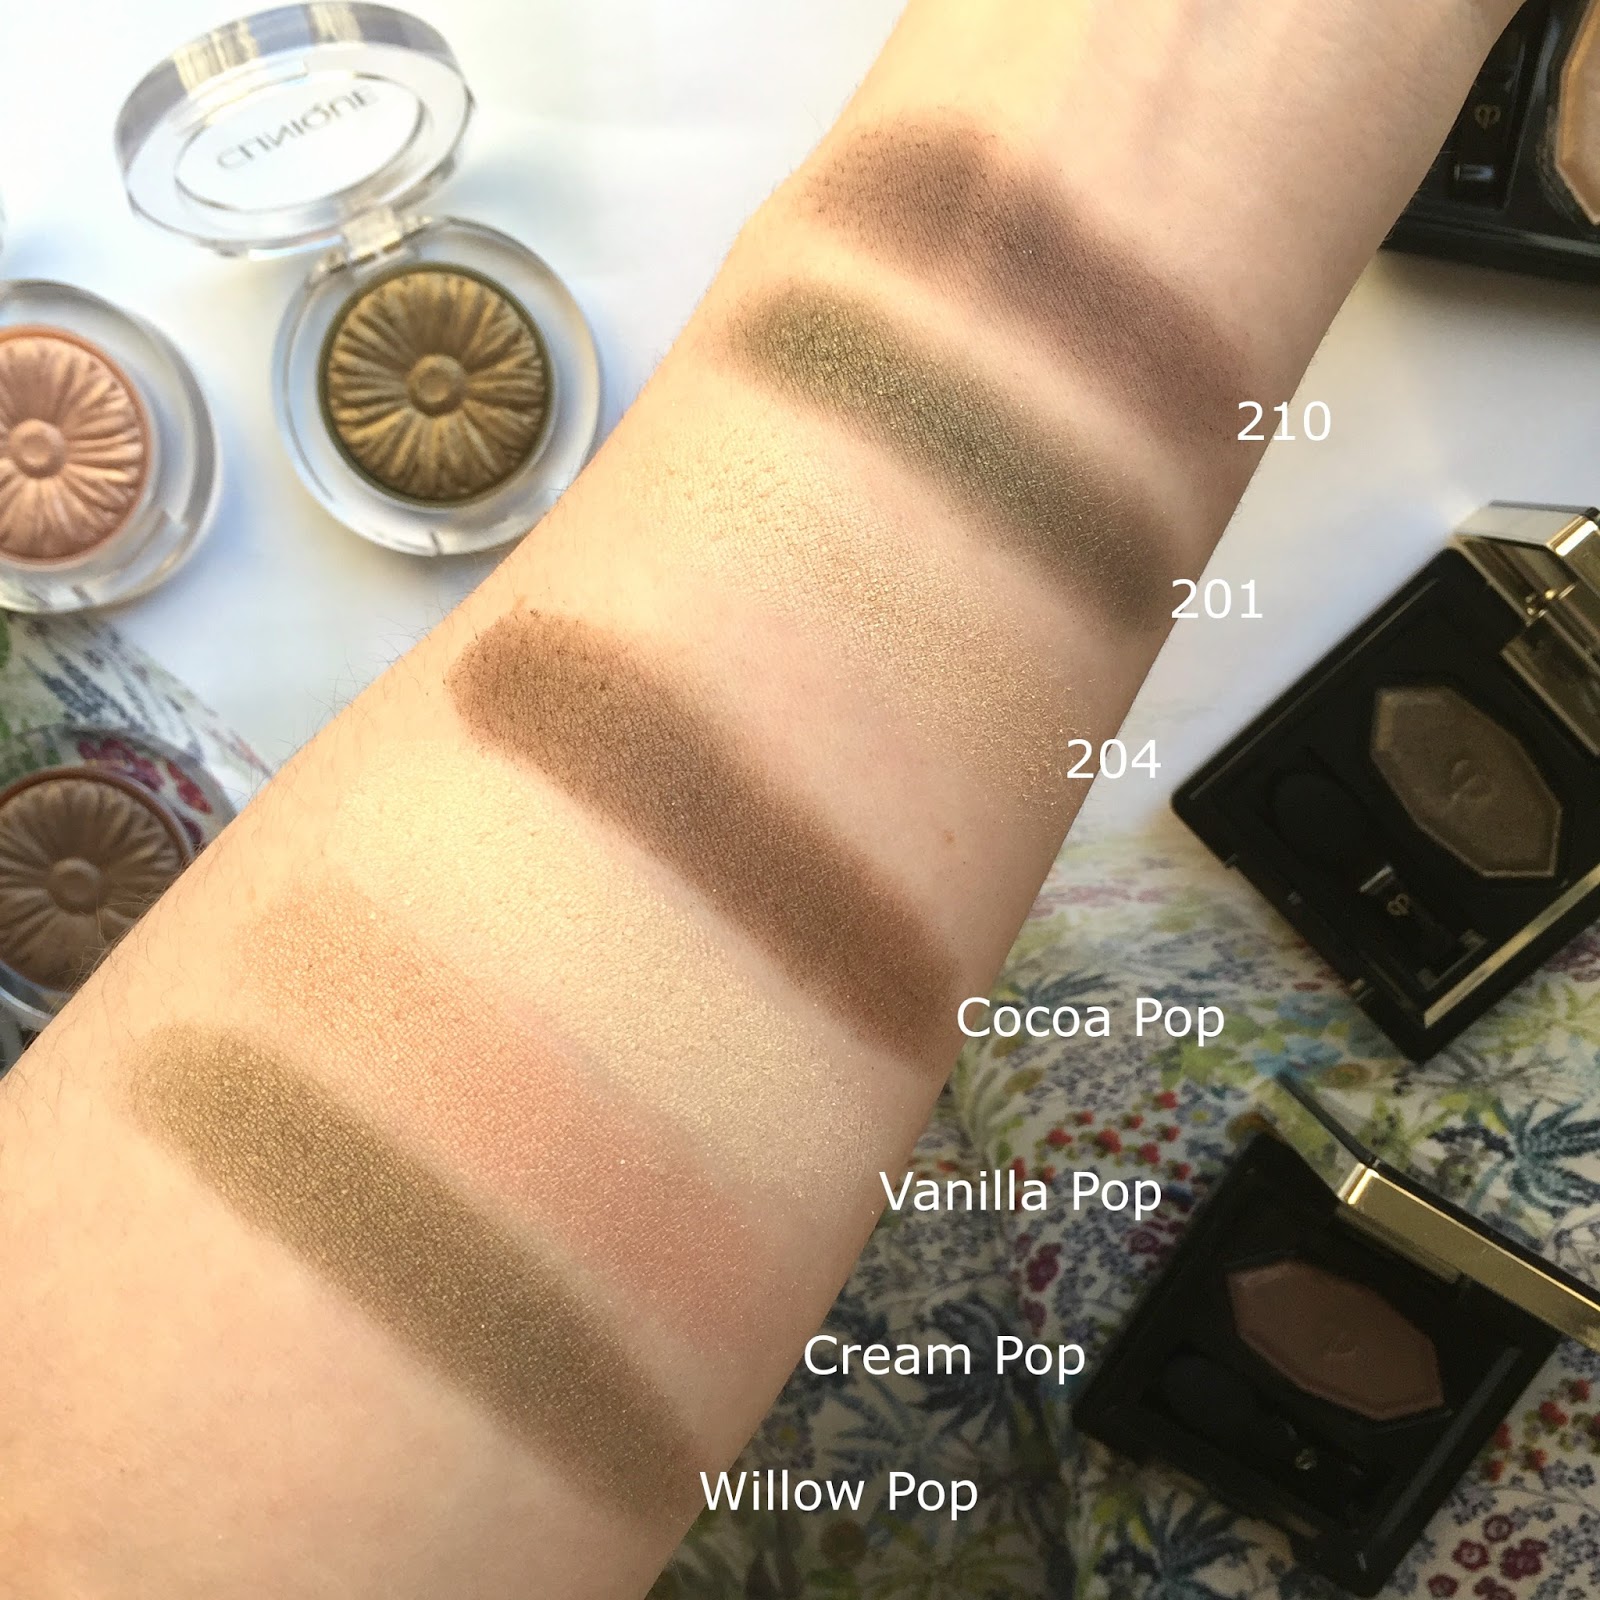 New Shadows Try Clinique and Cle Peau Beaute - alittlebitetc